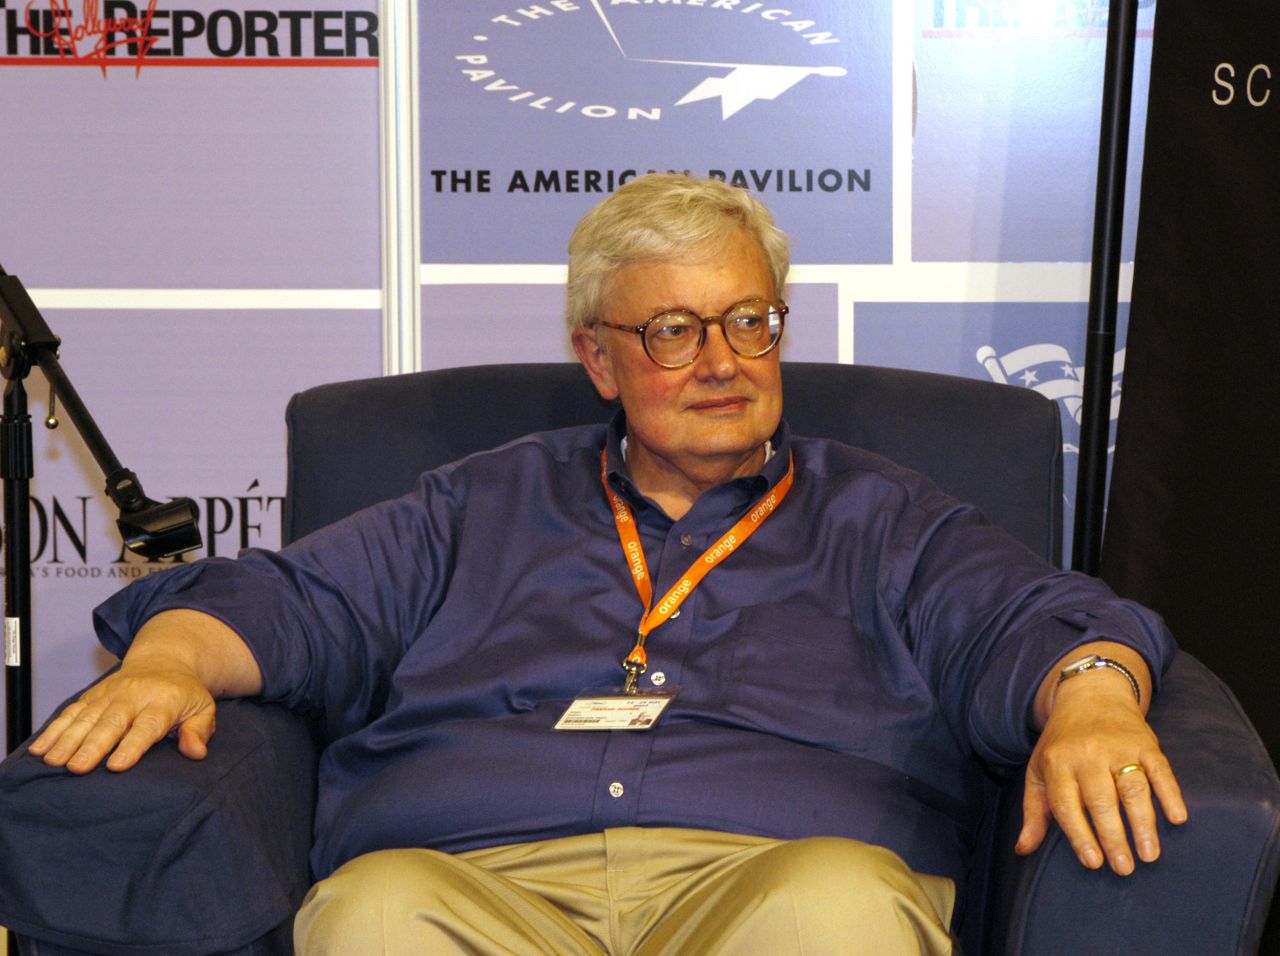 Ebert at the 2003 Cannes Film Festival Roundtable at the American Pavilion in Cannes, France.